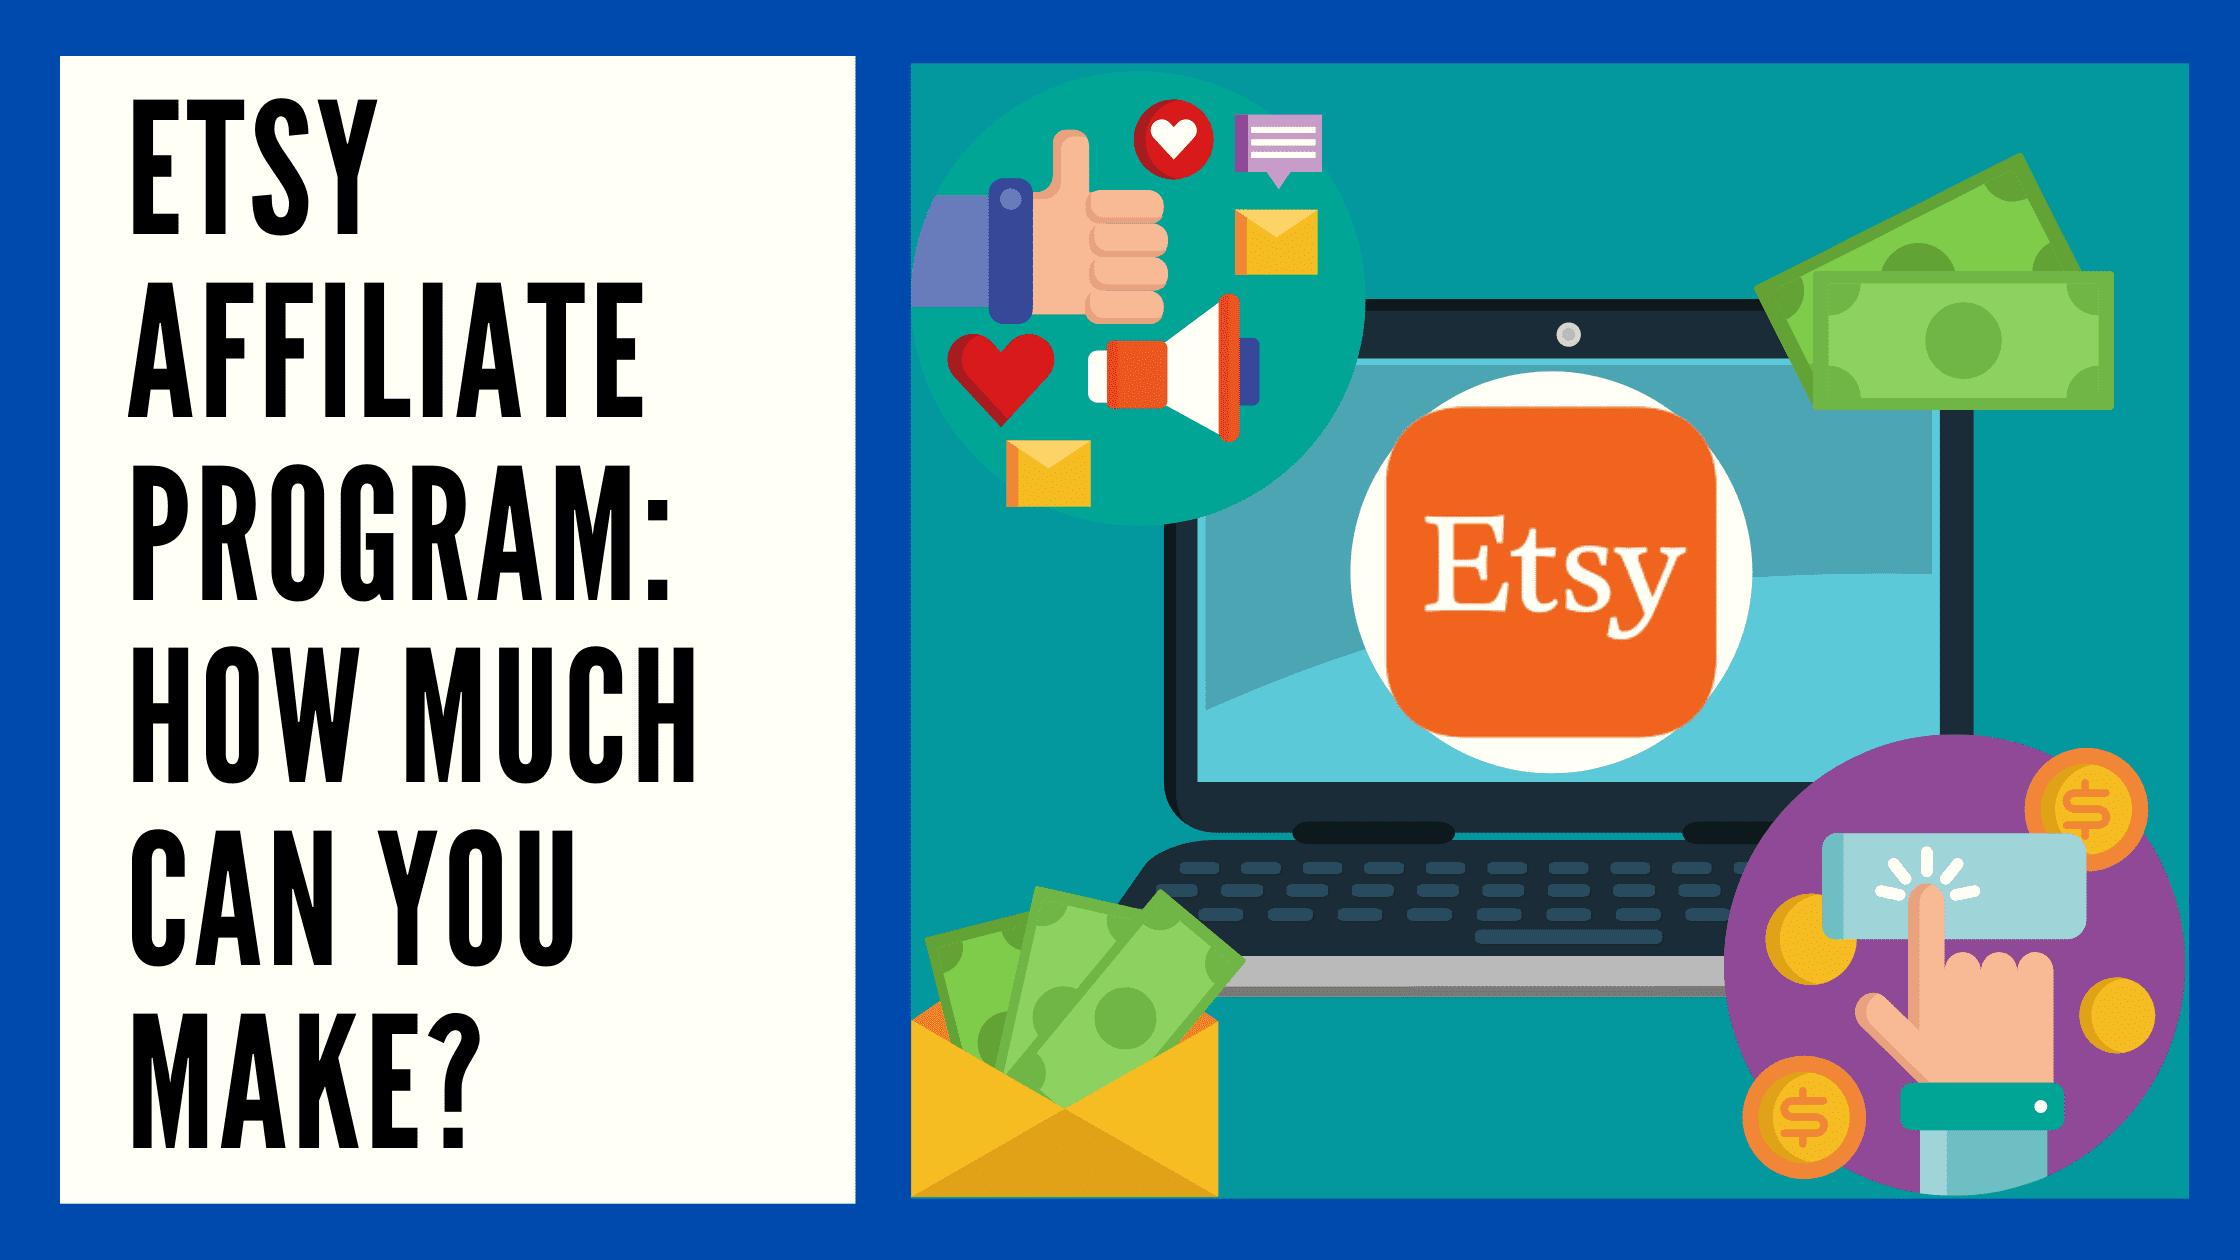 Etsy affiliate program how much can you make